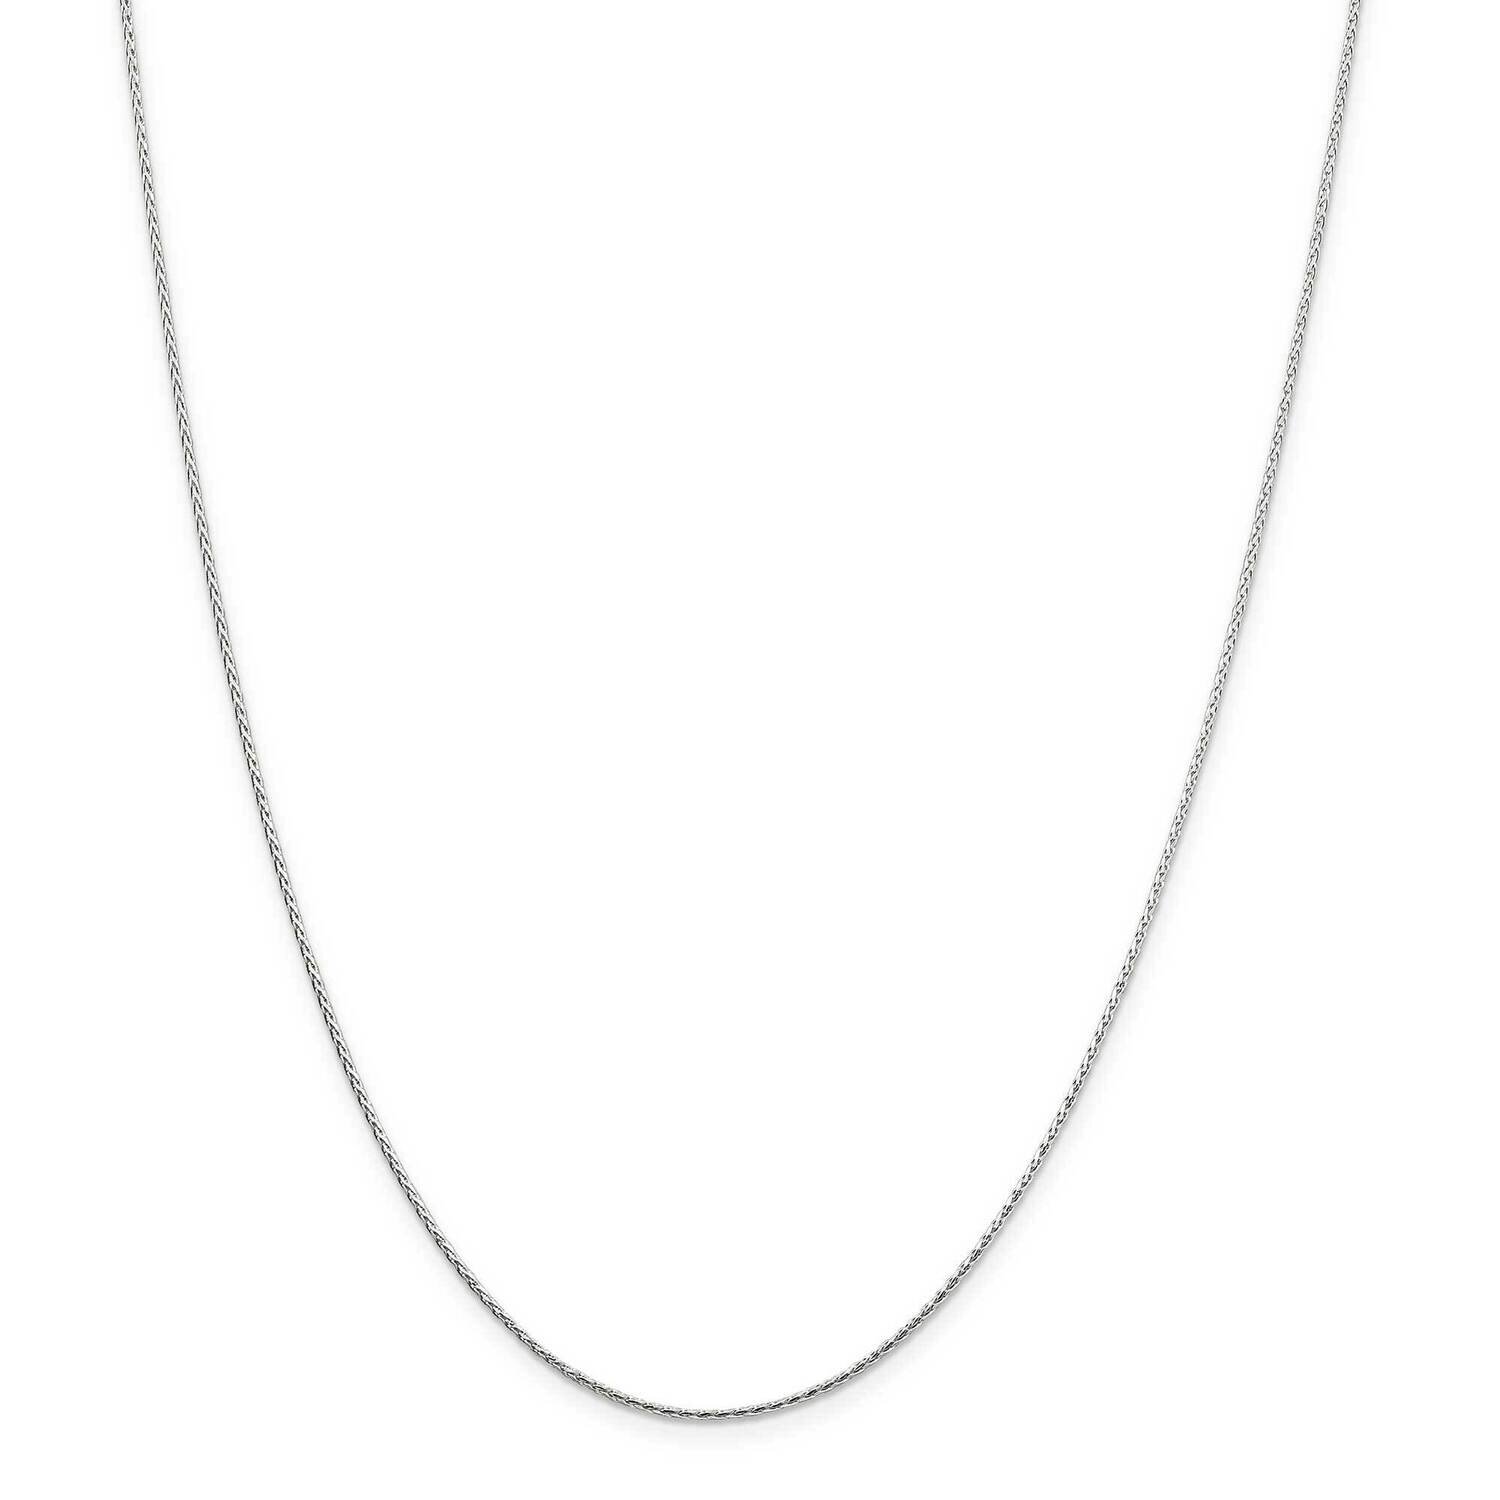 1.25mm Diamond-Cut Round Spiga Chain with 4 Inch Extender 22 Inch Sterling Silver QSR035E-22